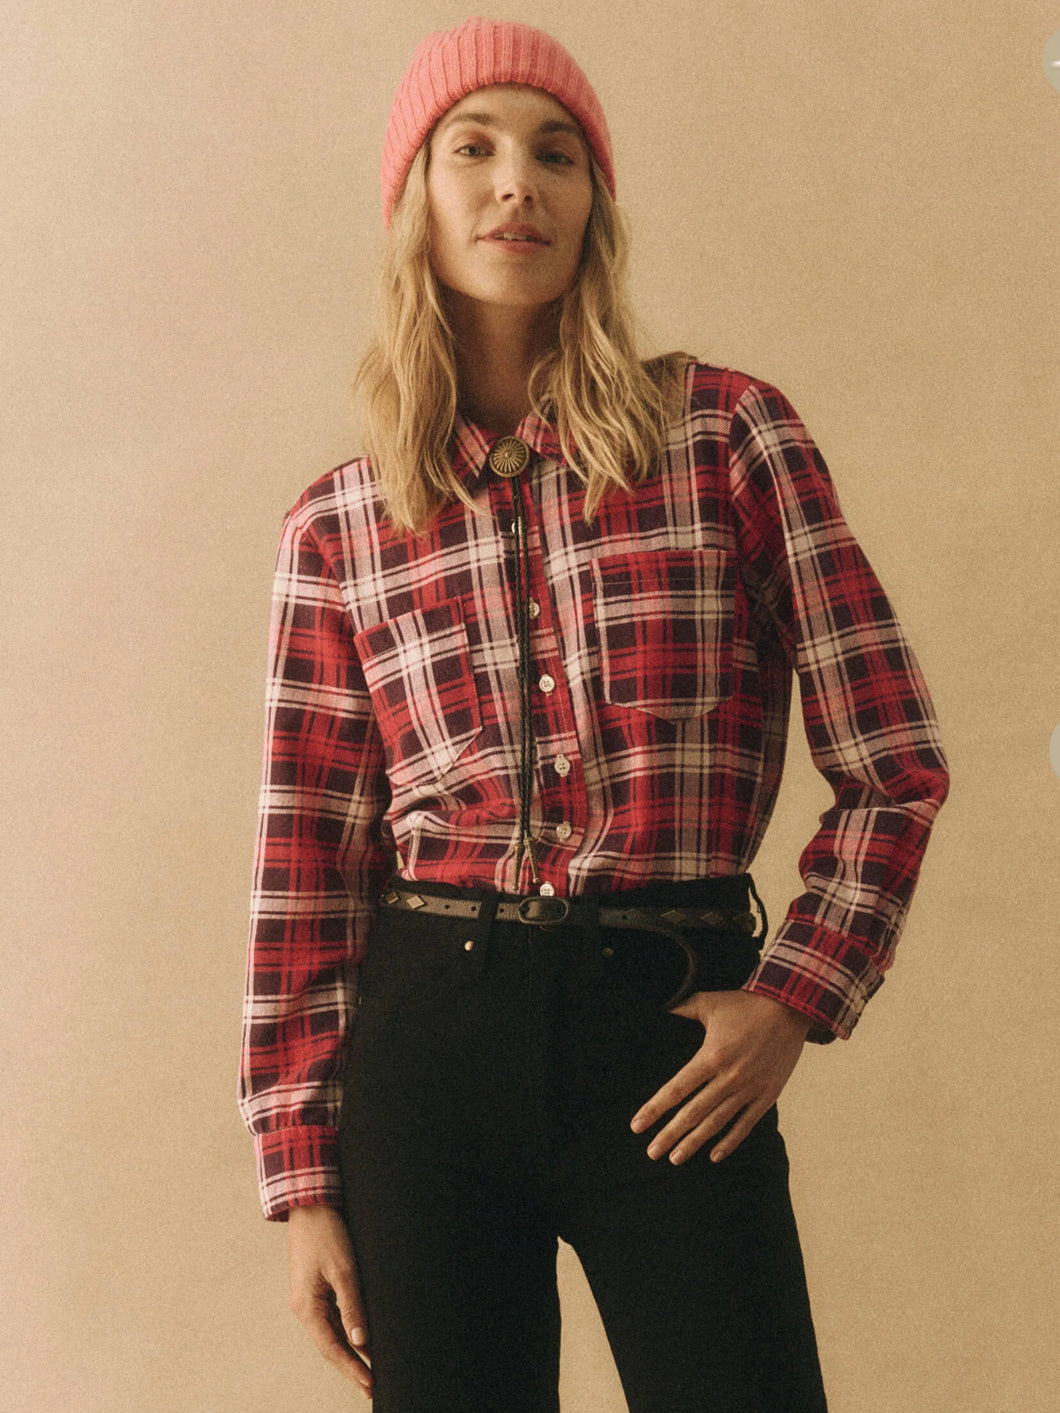 THE GREAT Scouting Shirt in Fuchsia Plaid